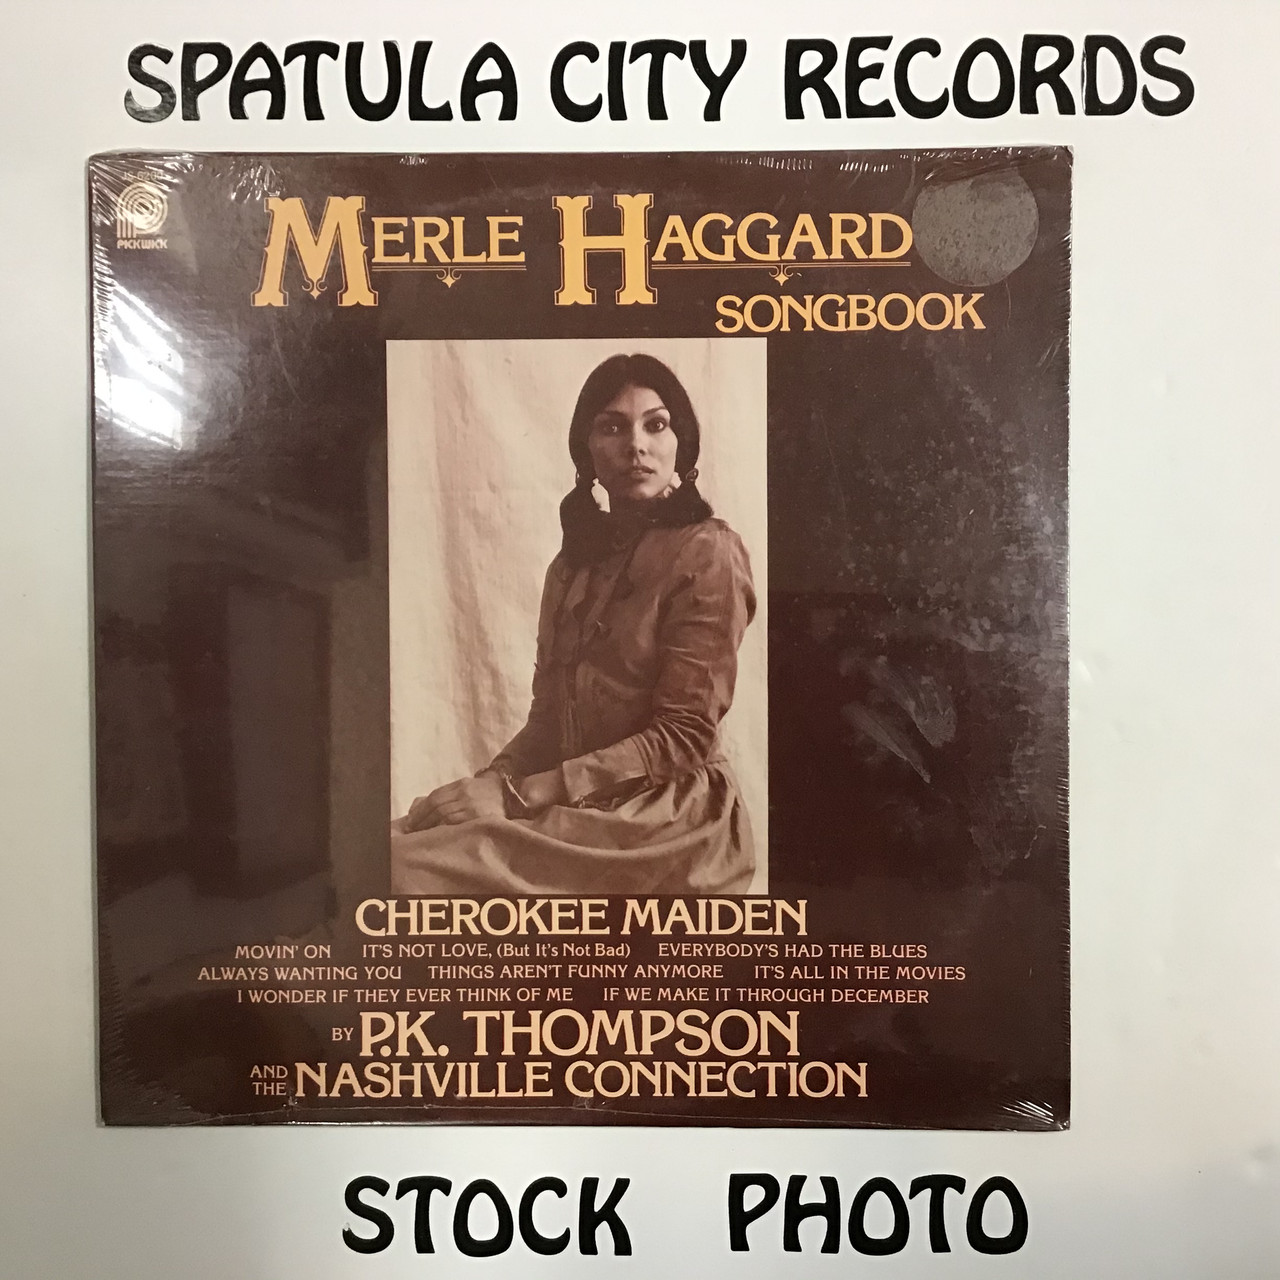 P.K. Thompson and The Nashville Connection - Merle Haggard Songbook - SEALED - IMPORT - vinyl record LP